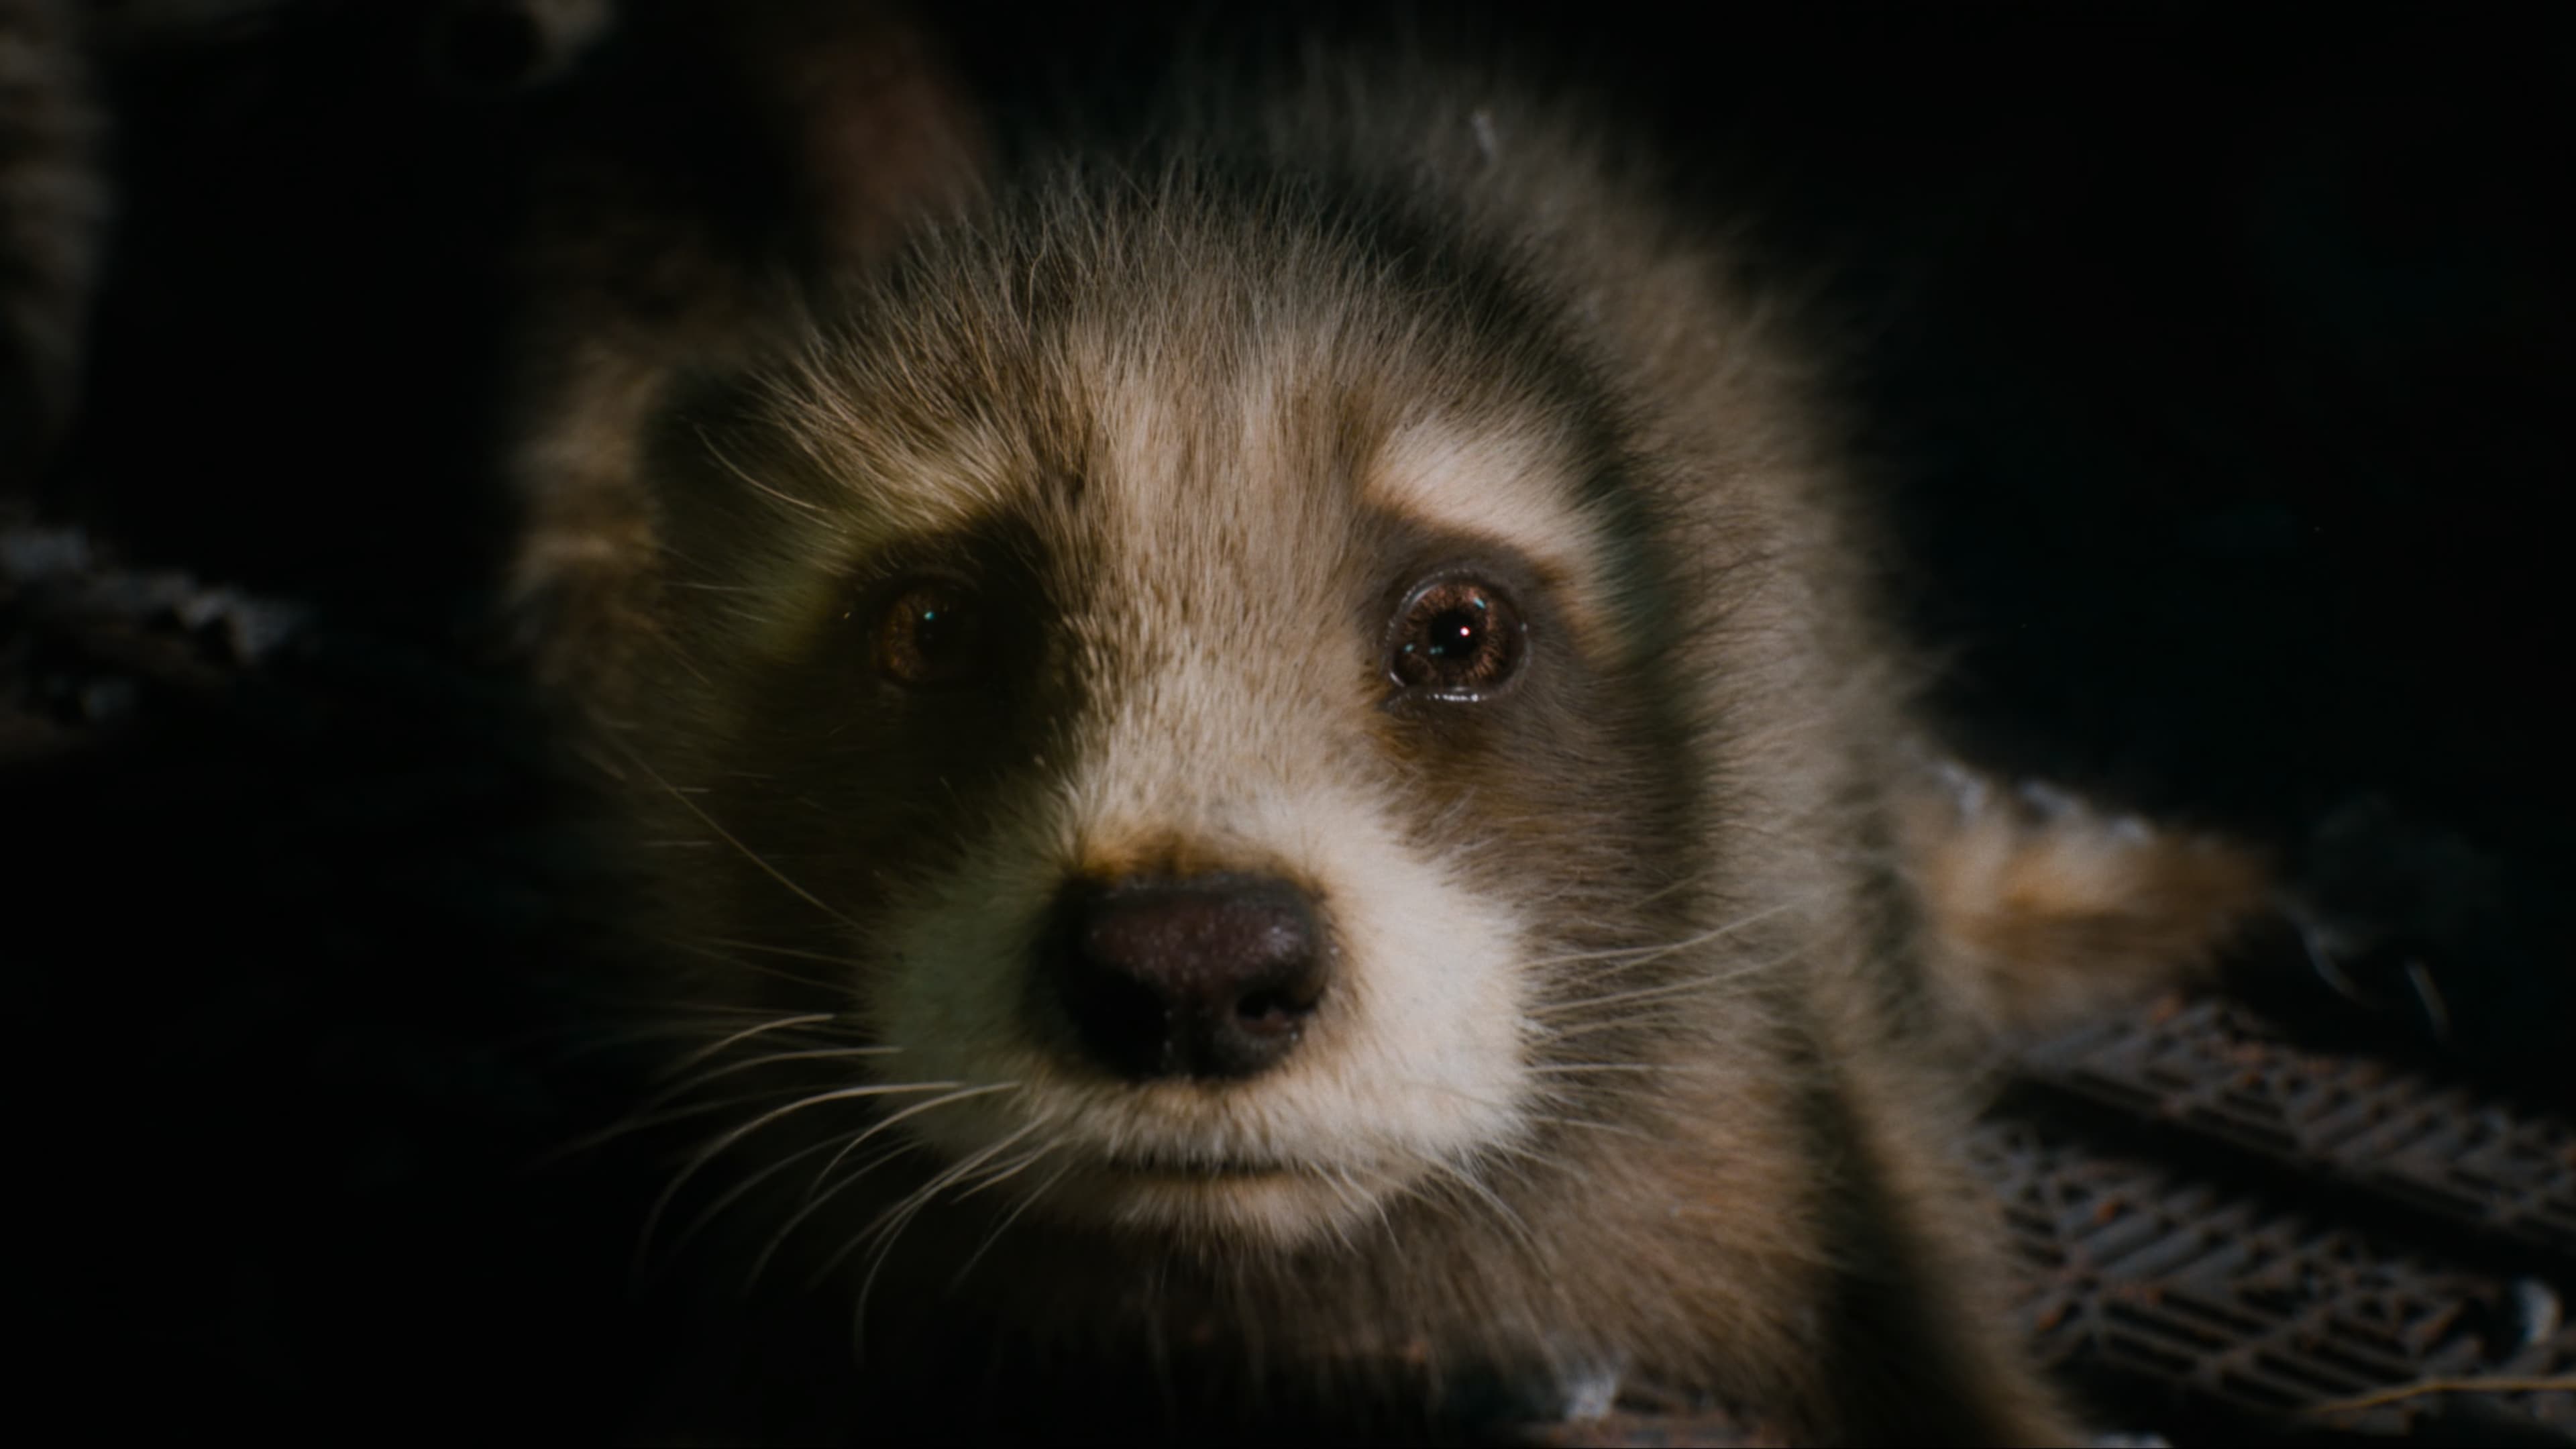 The backtory of Rocket revealed in Guardians of the Galaxy Vol.3